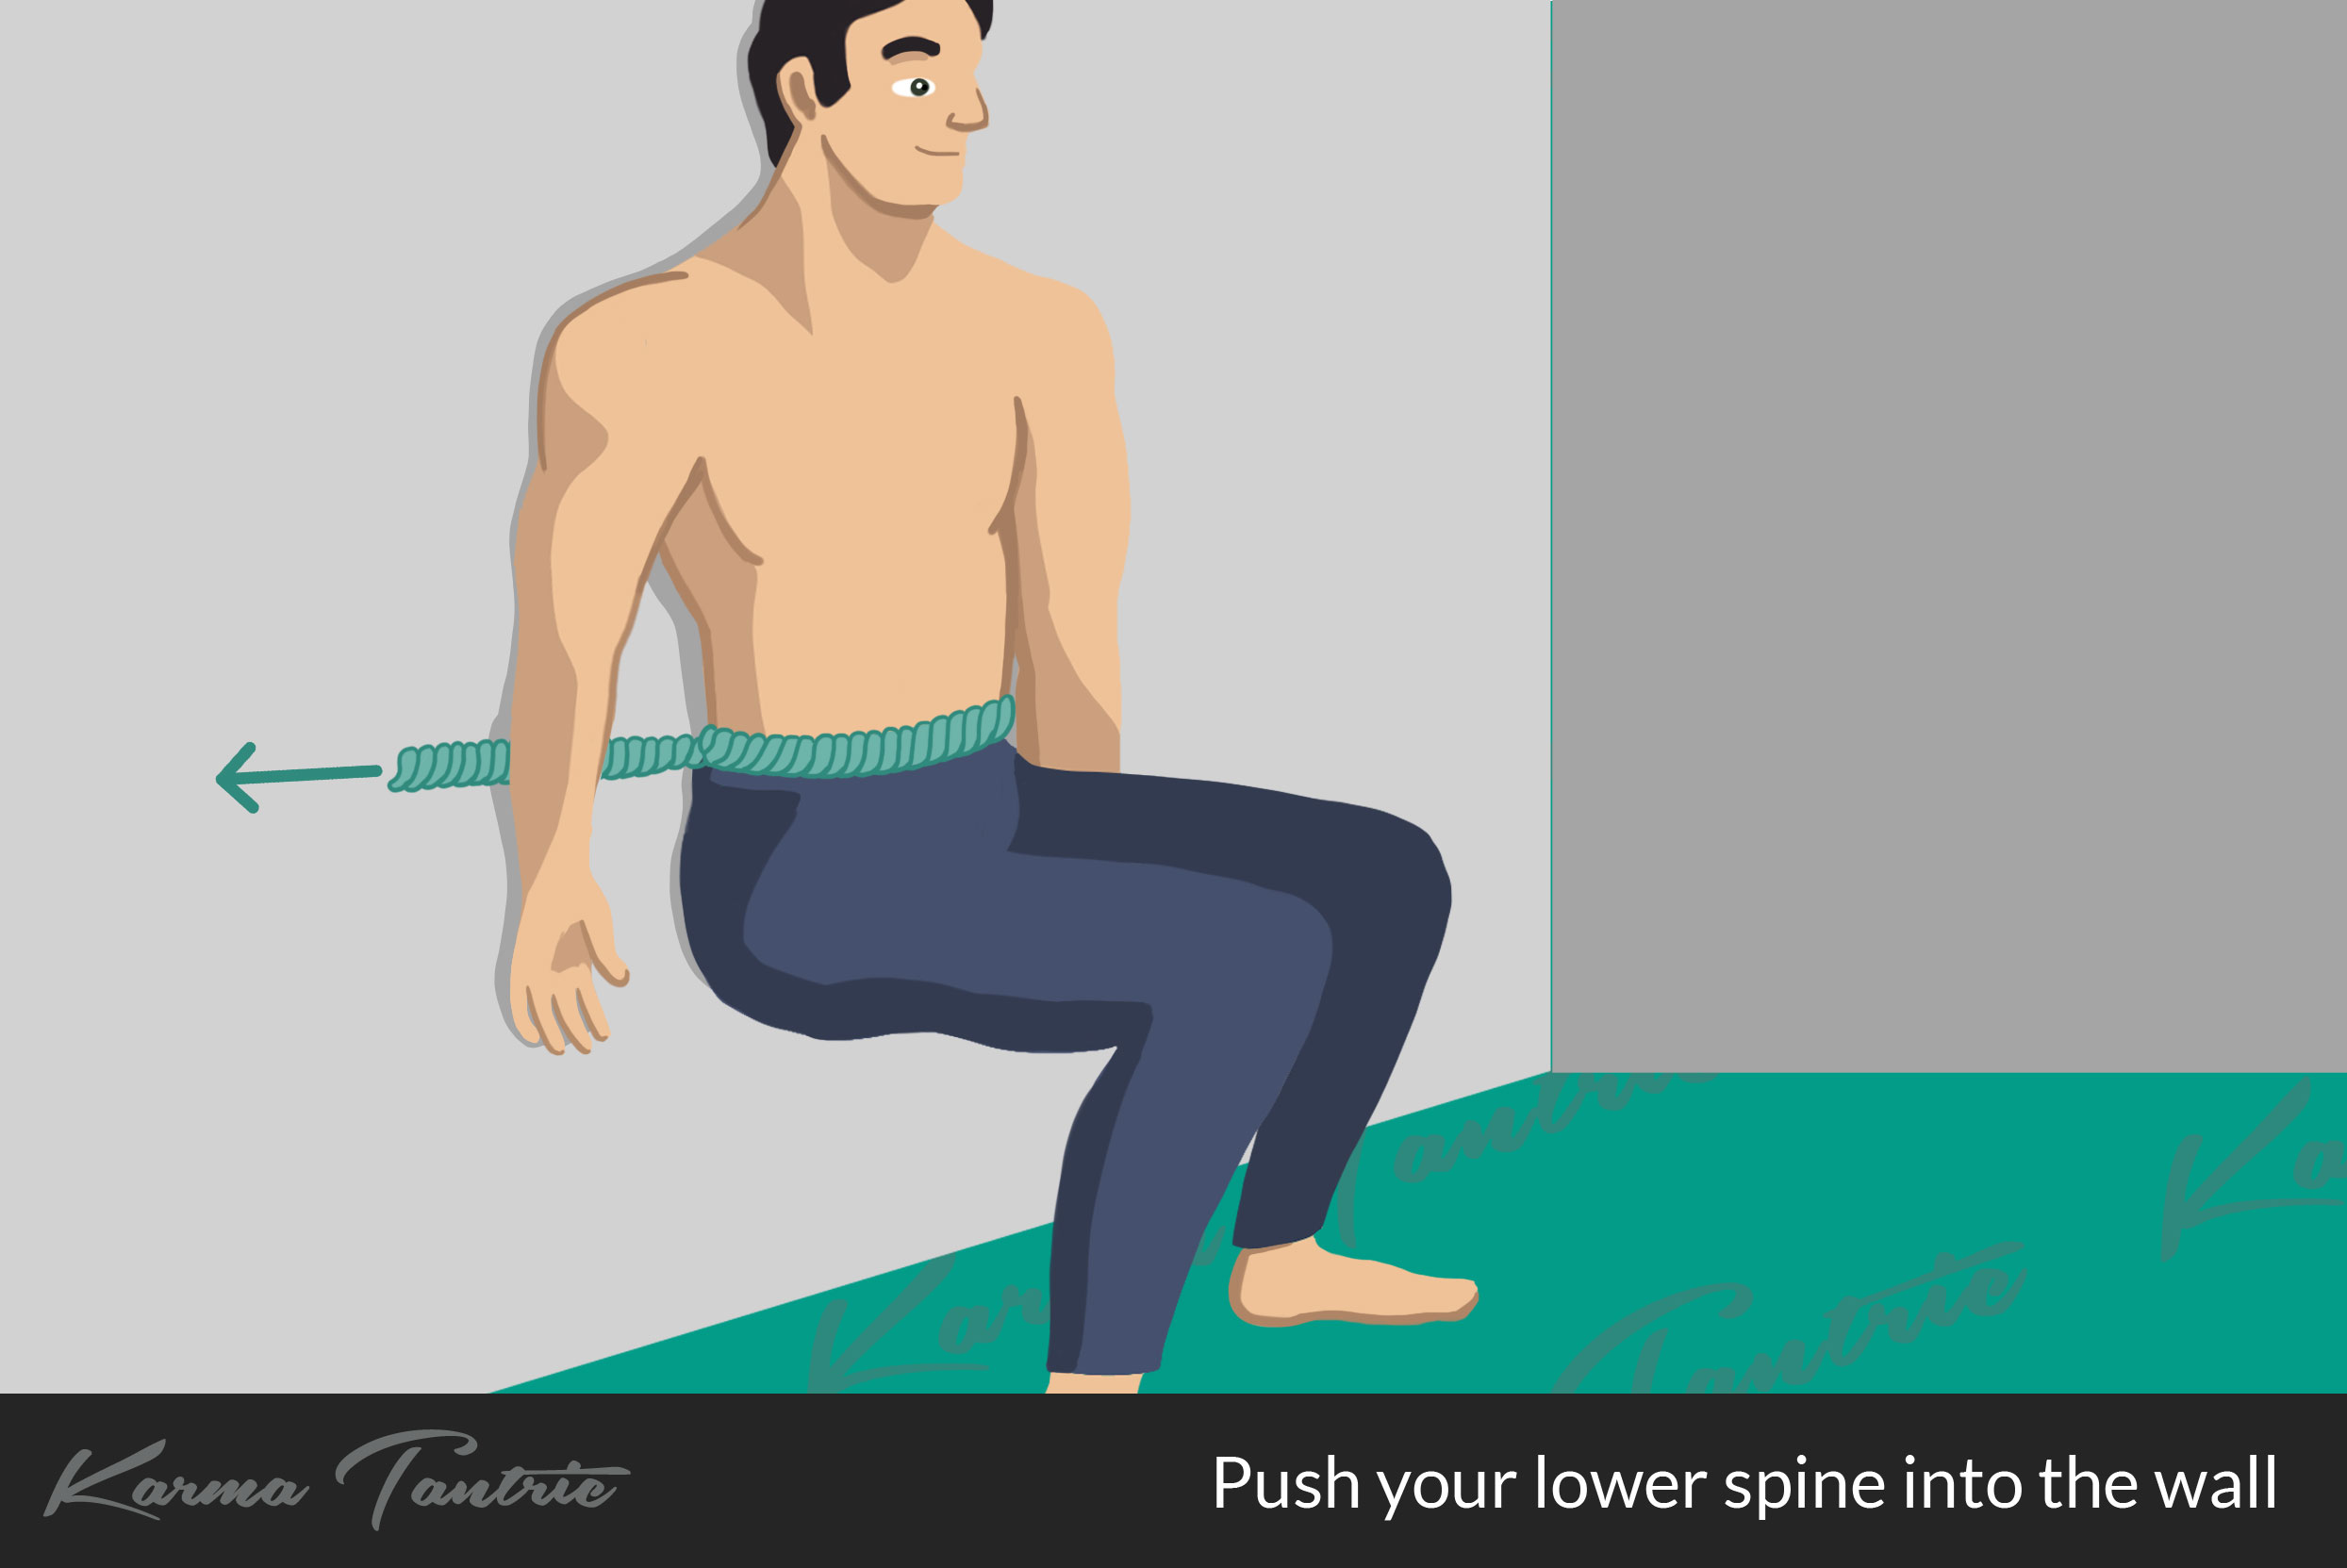 Push your lower spine into the wall